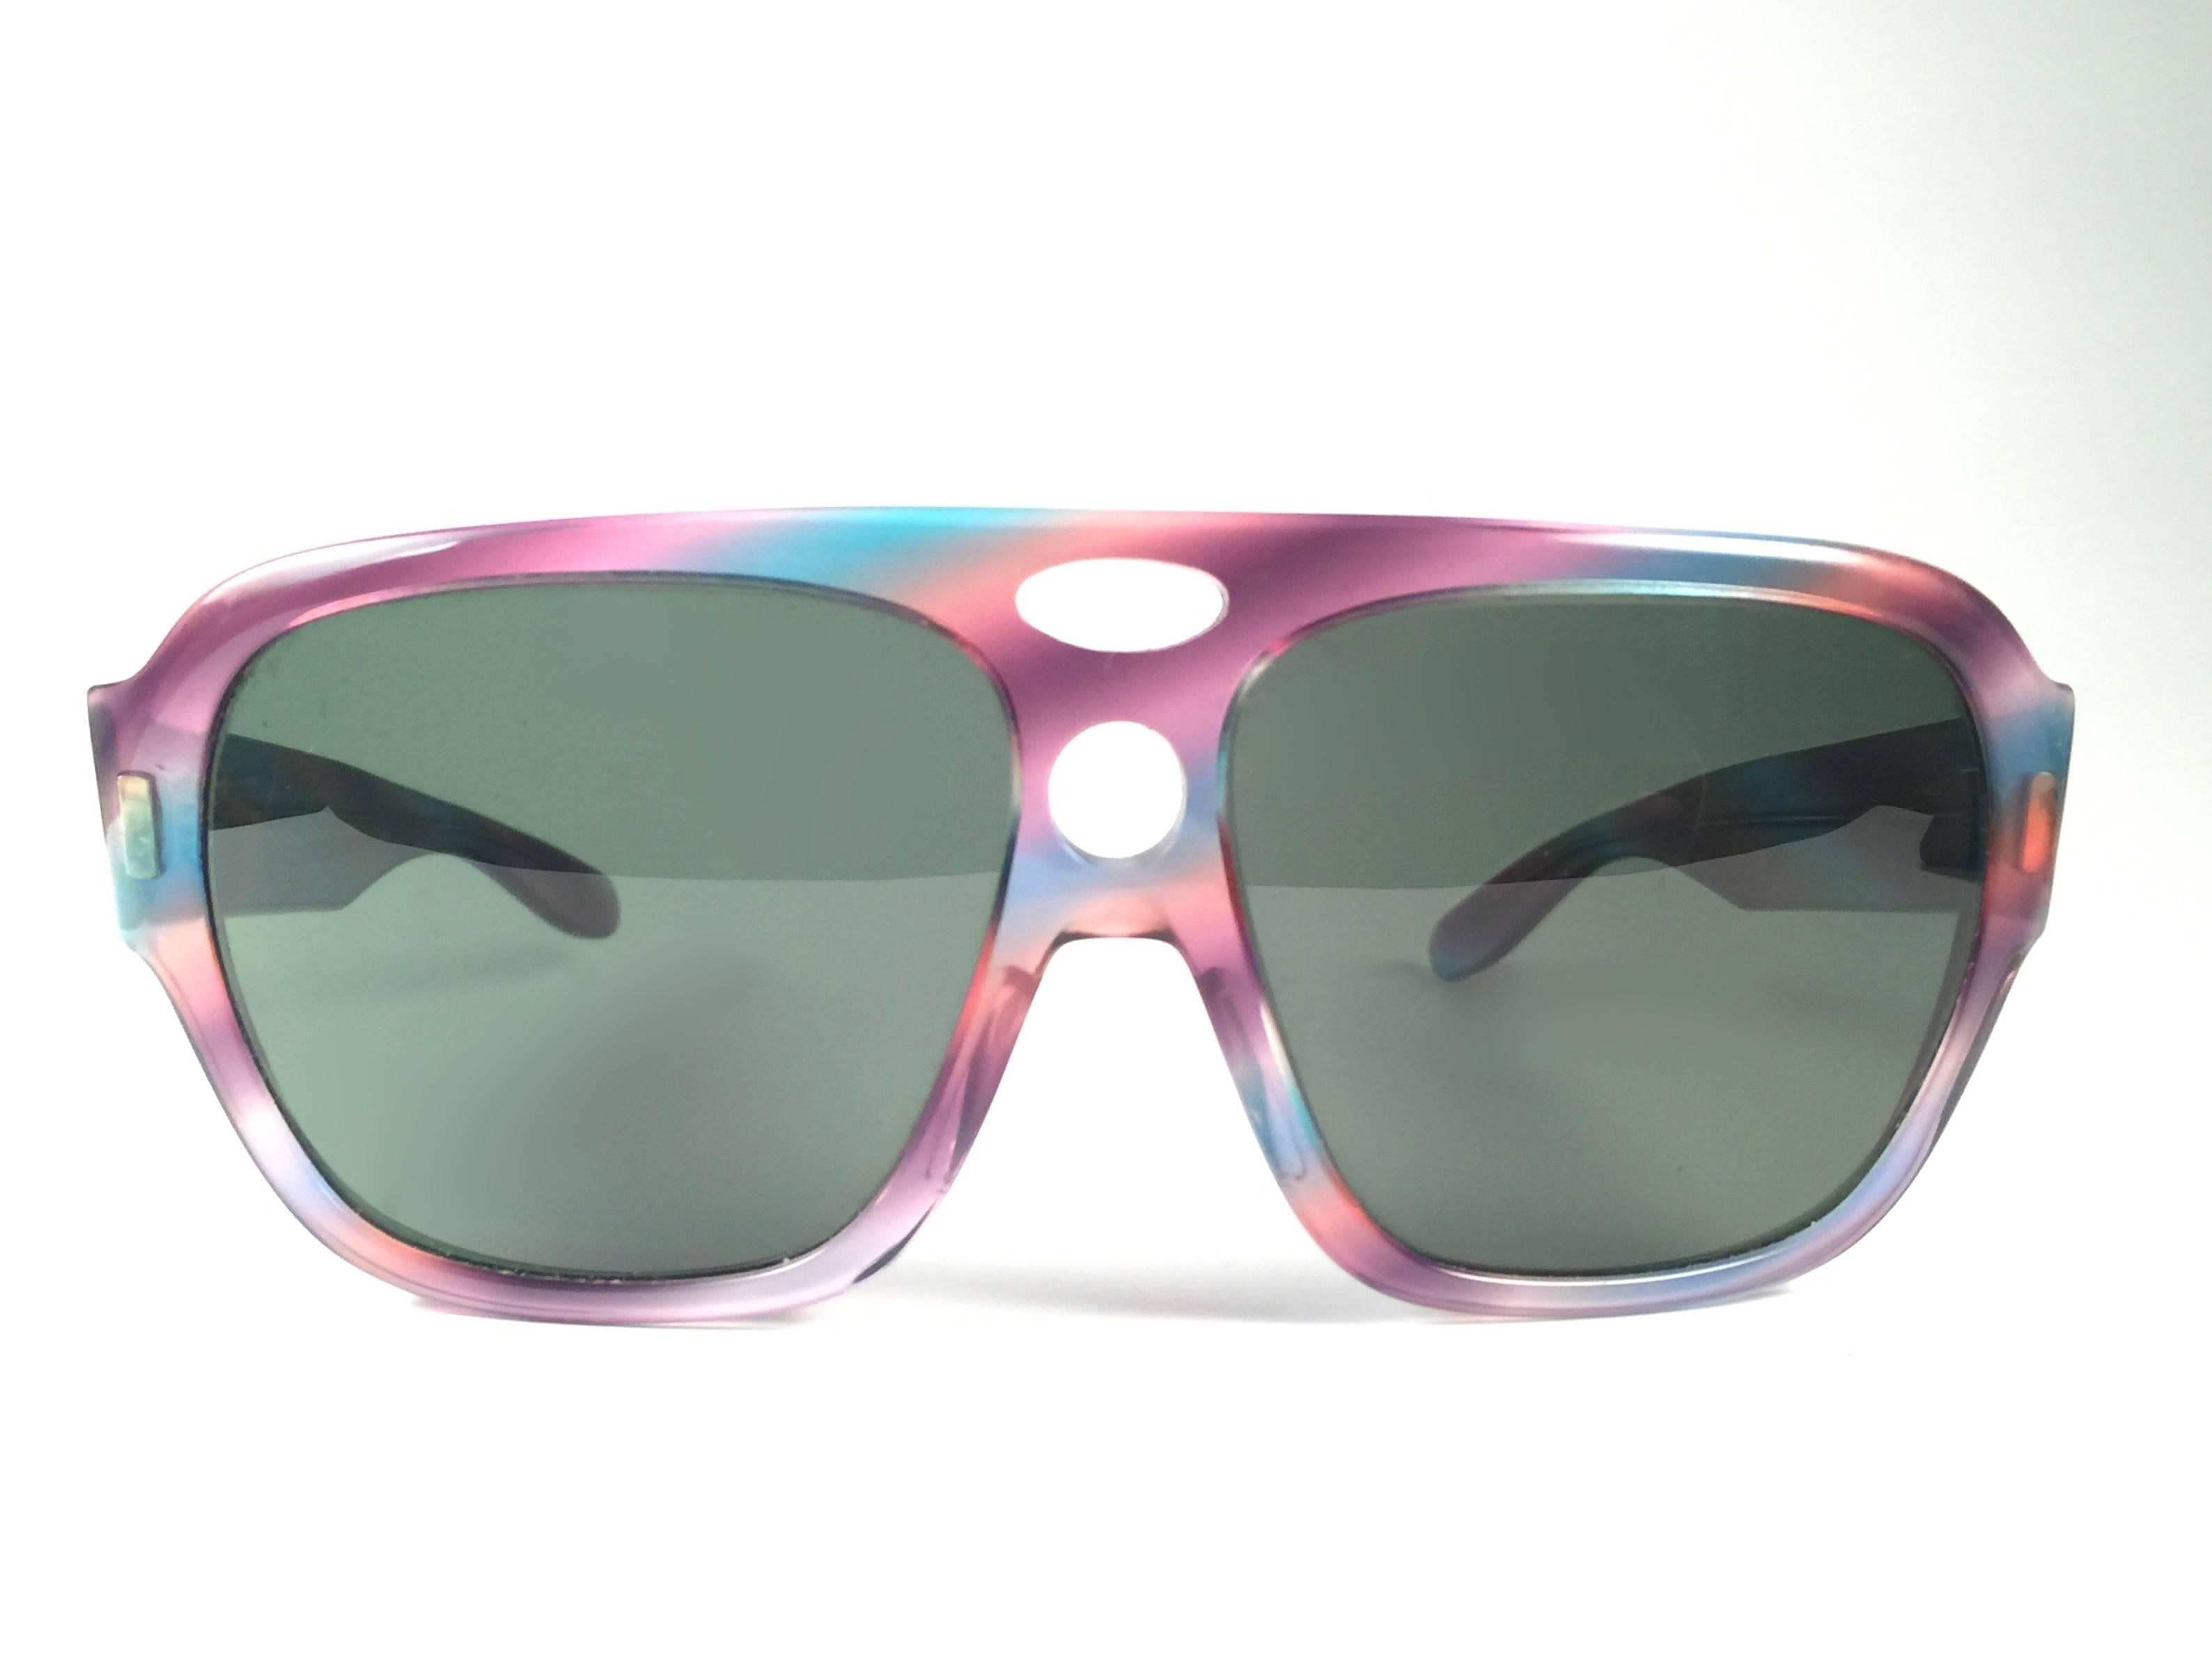 New and rare Vintage Corrigan II multicolor frame holding a spotless pair of G15 grey lenses.  
New, never worn or displayed.  
This pair may have minor sign of wear due to nearly 40 years of storage, the lens have two small scratches not on the